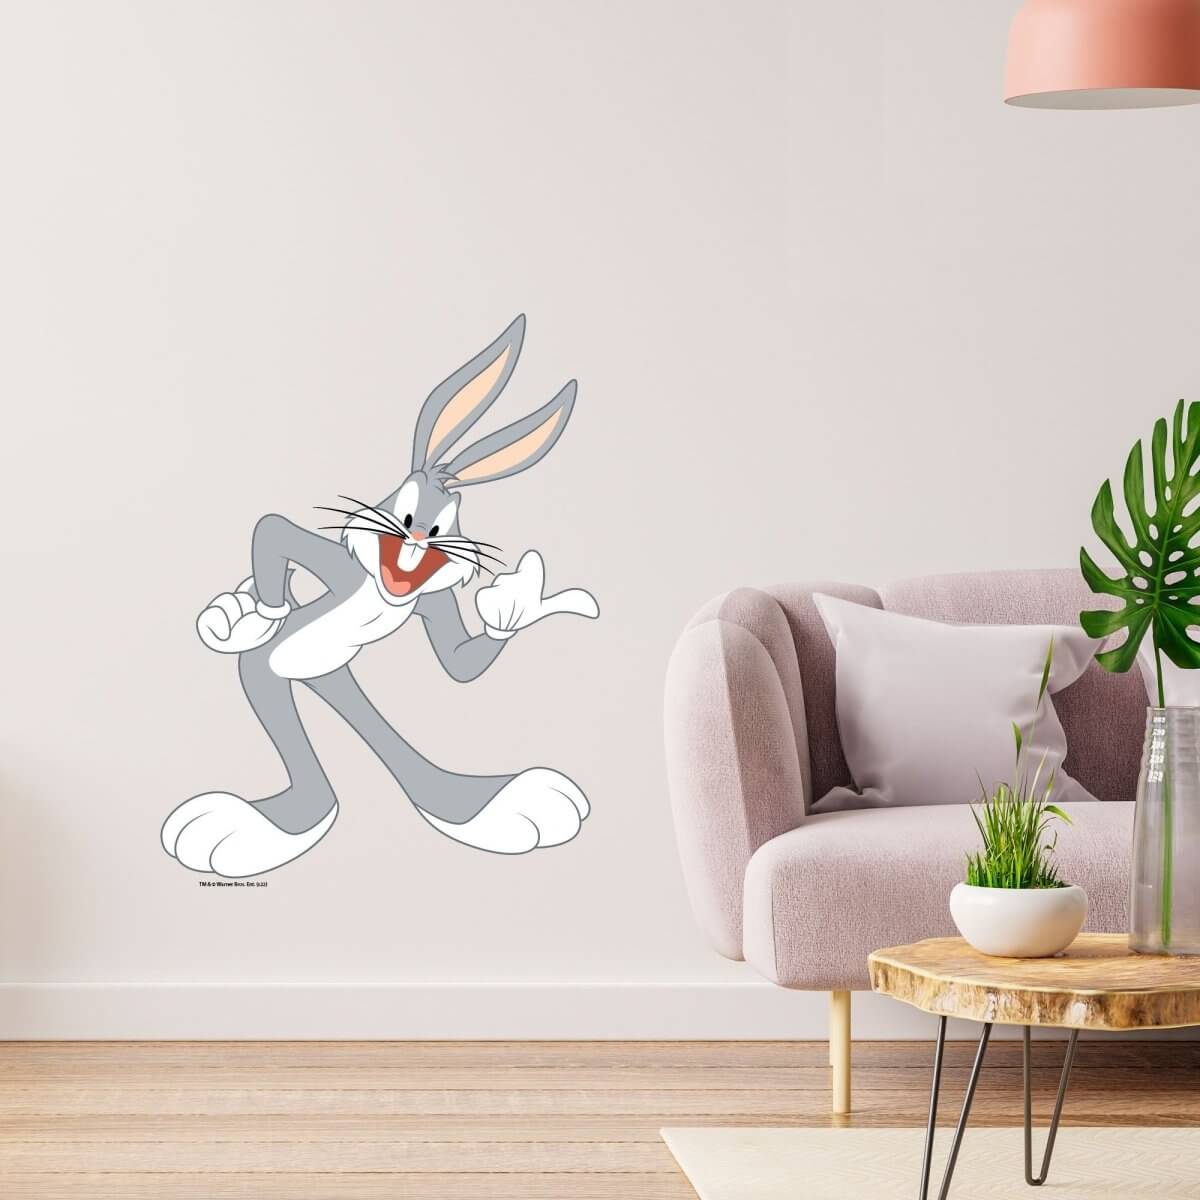 Kismet Decals Looney Tunes Bugs Bunny Devious Licensed Wall Sticker - Easy DIY Home & Kids Room Decor Wall Decal Art - Kismet Decals